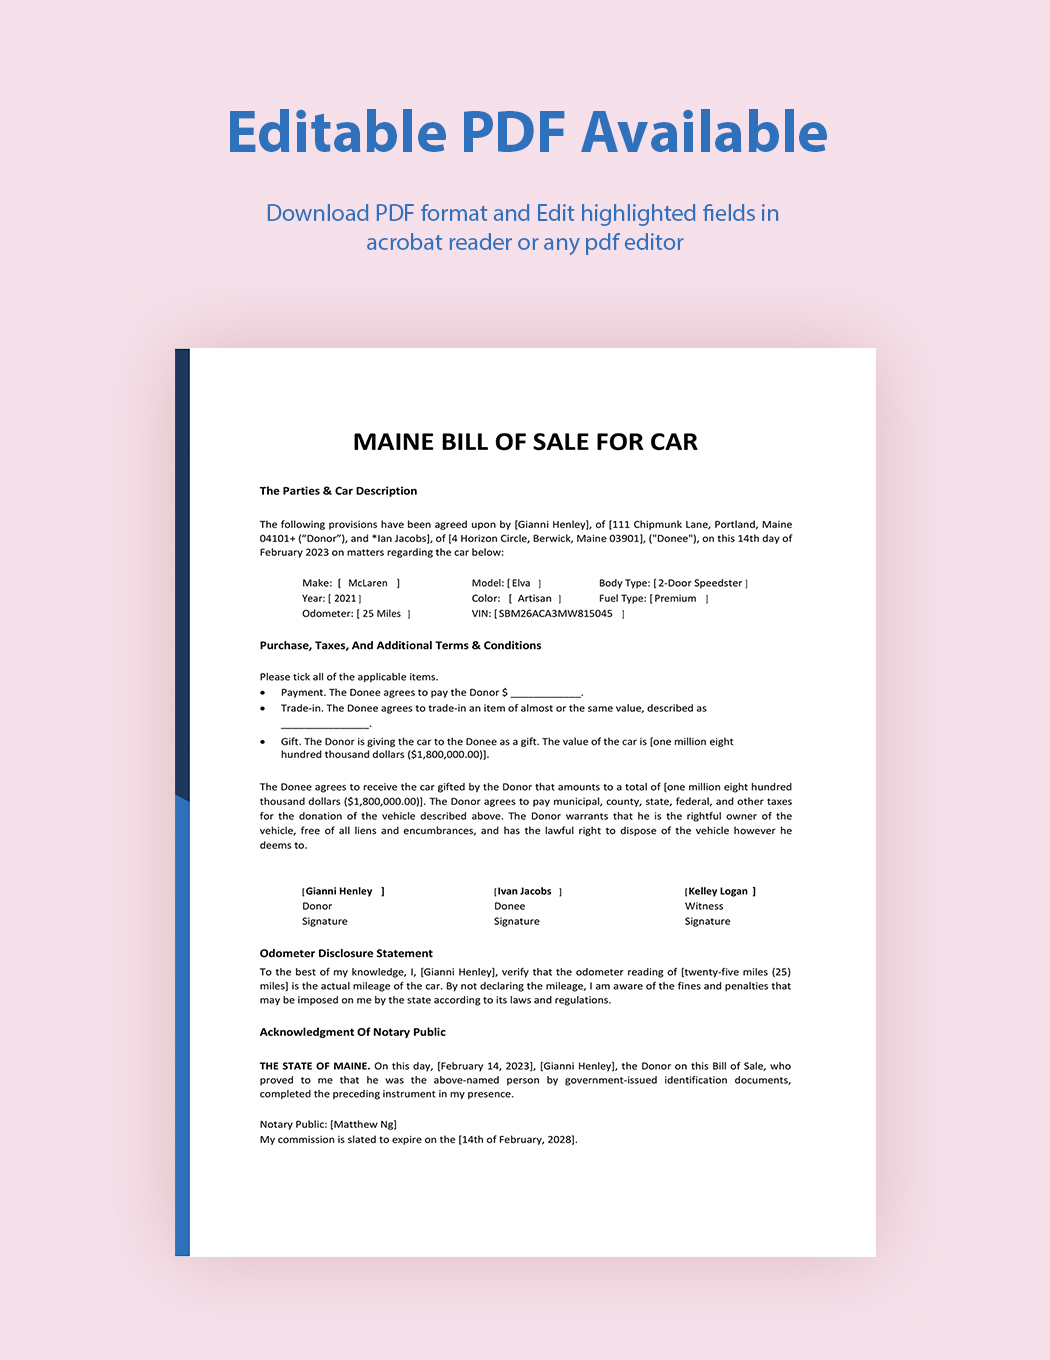 Maine Bill of Sale For Car Template